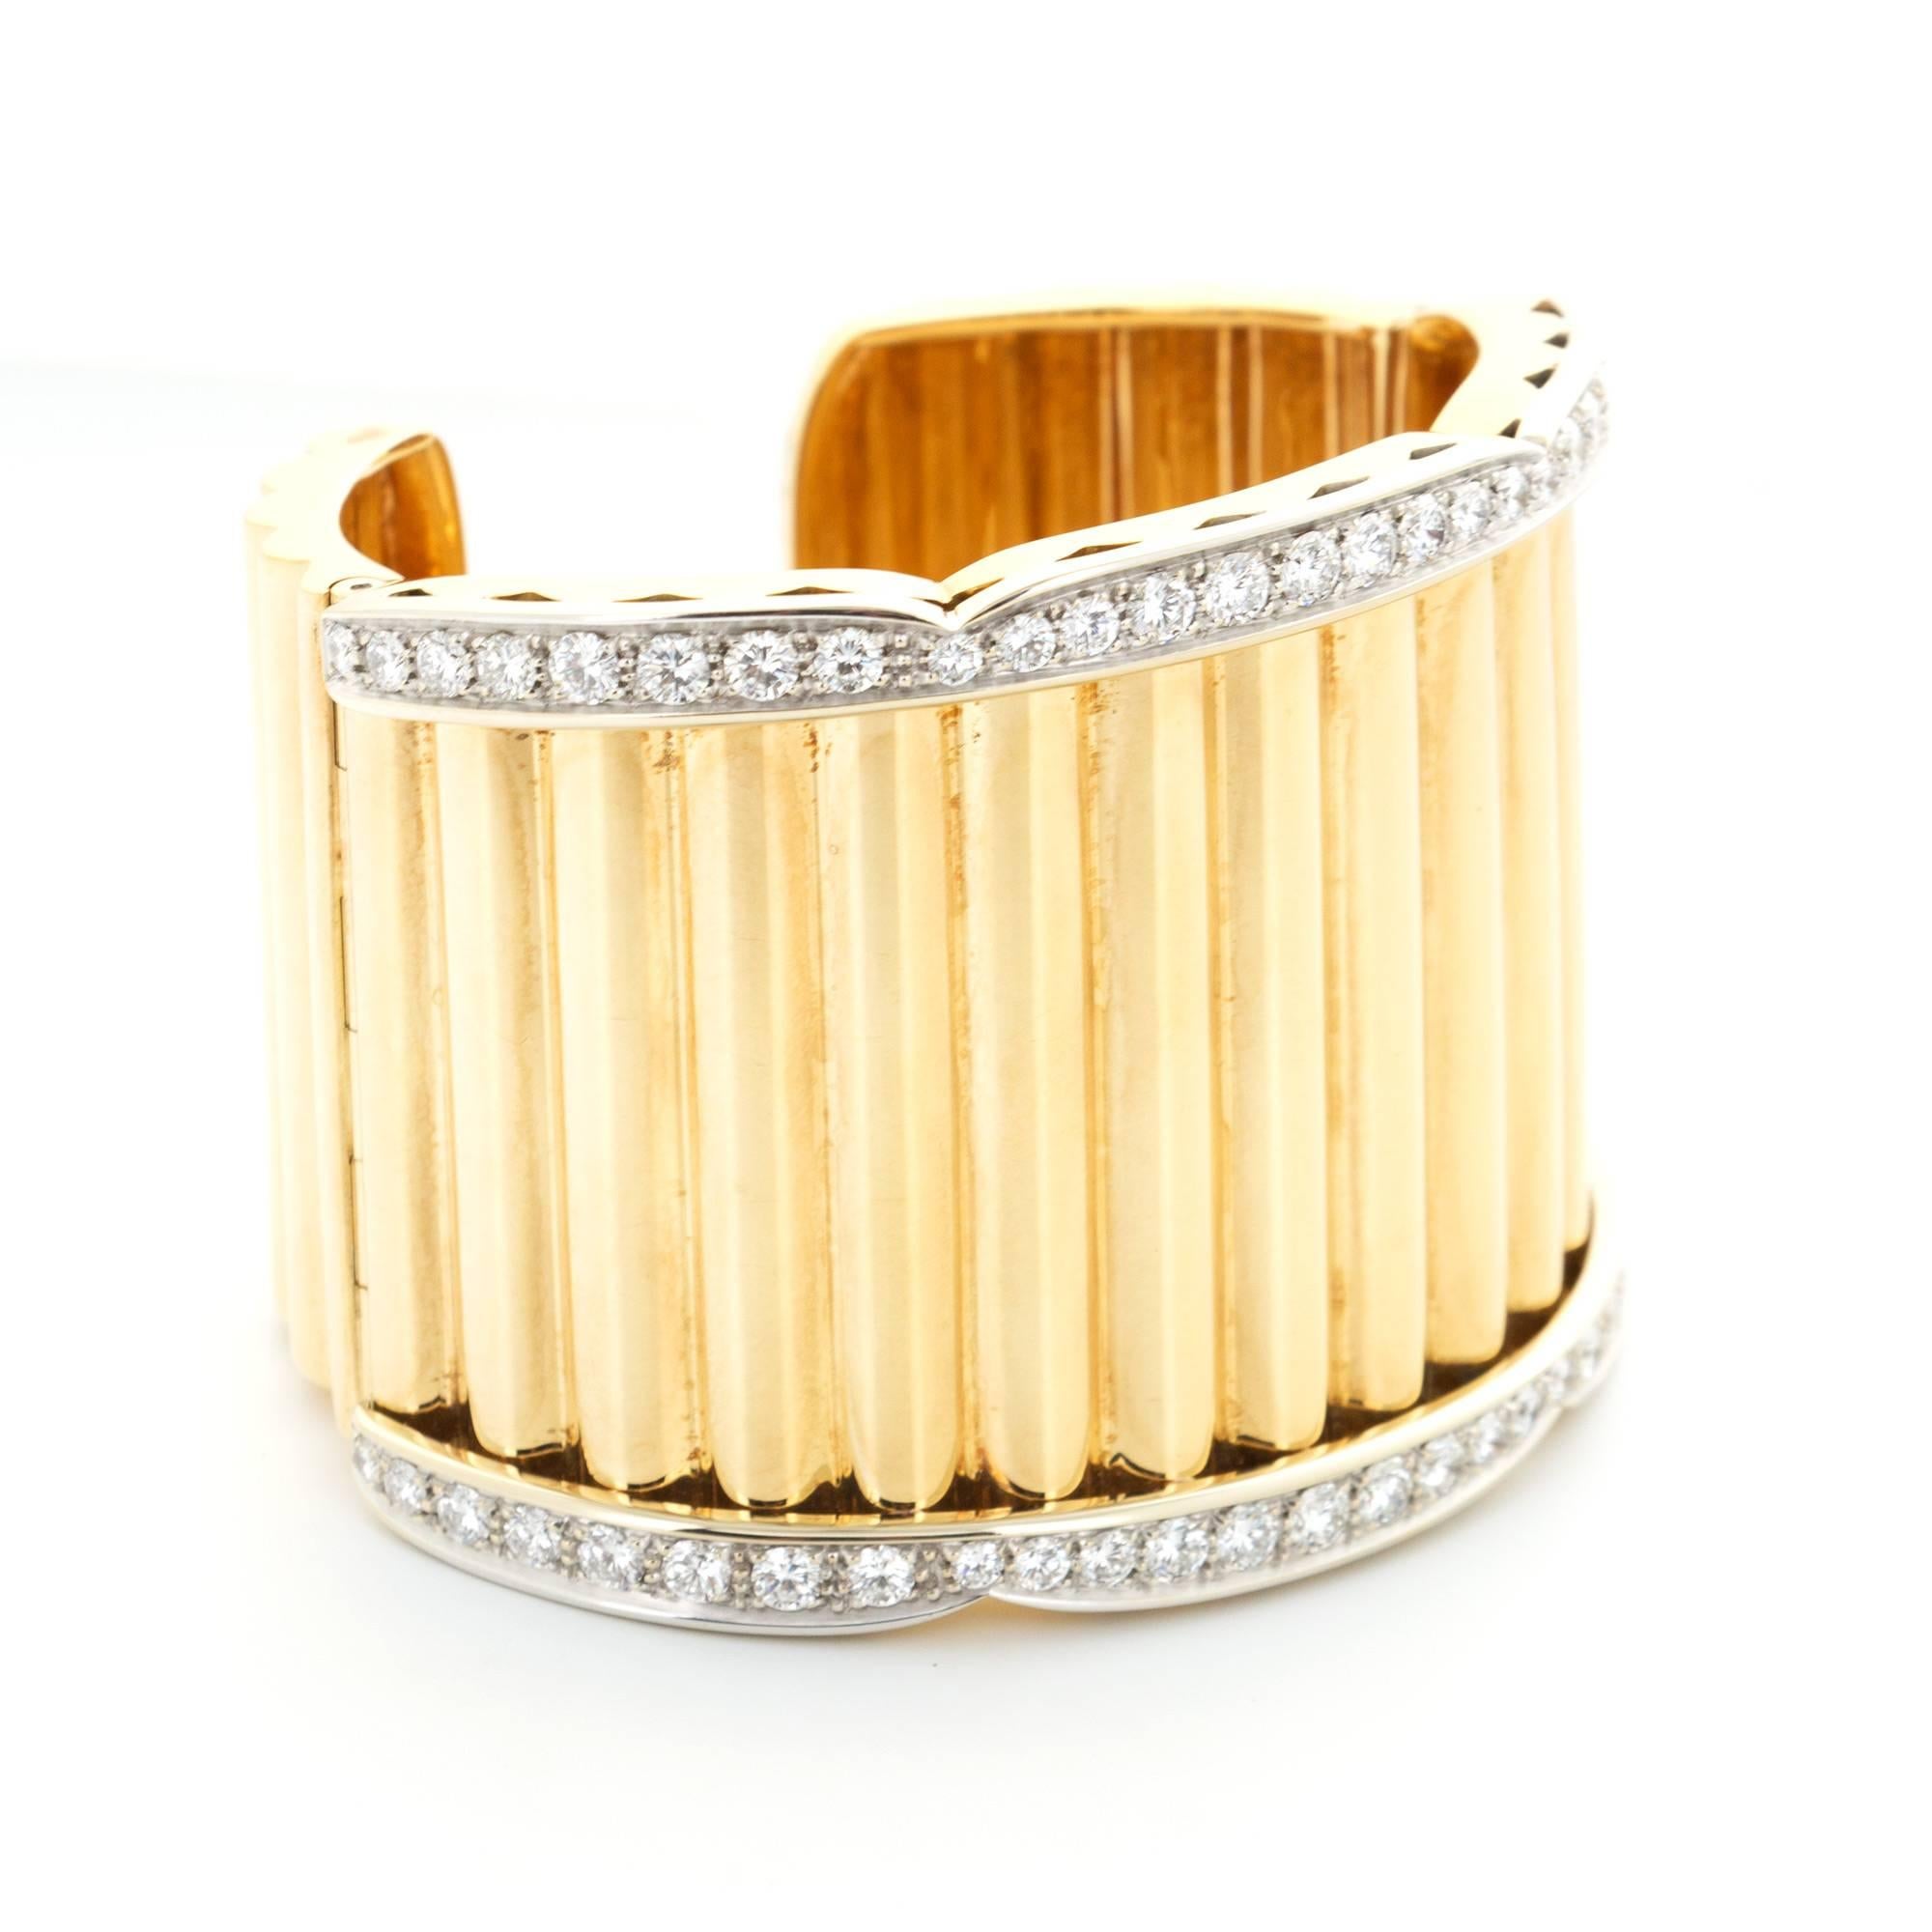 A Van Cleef & Arpels Wide Diamond-Set Cuff Bracelet in 18k Yellow Gold. 

Circa 1960's.

Very Rare and Unusual Design.